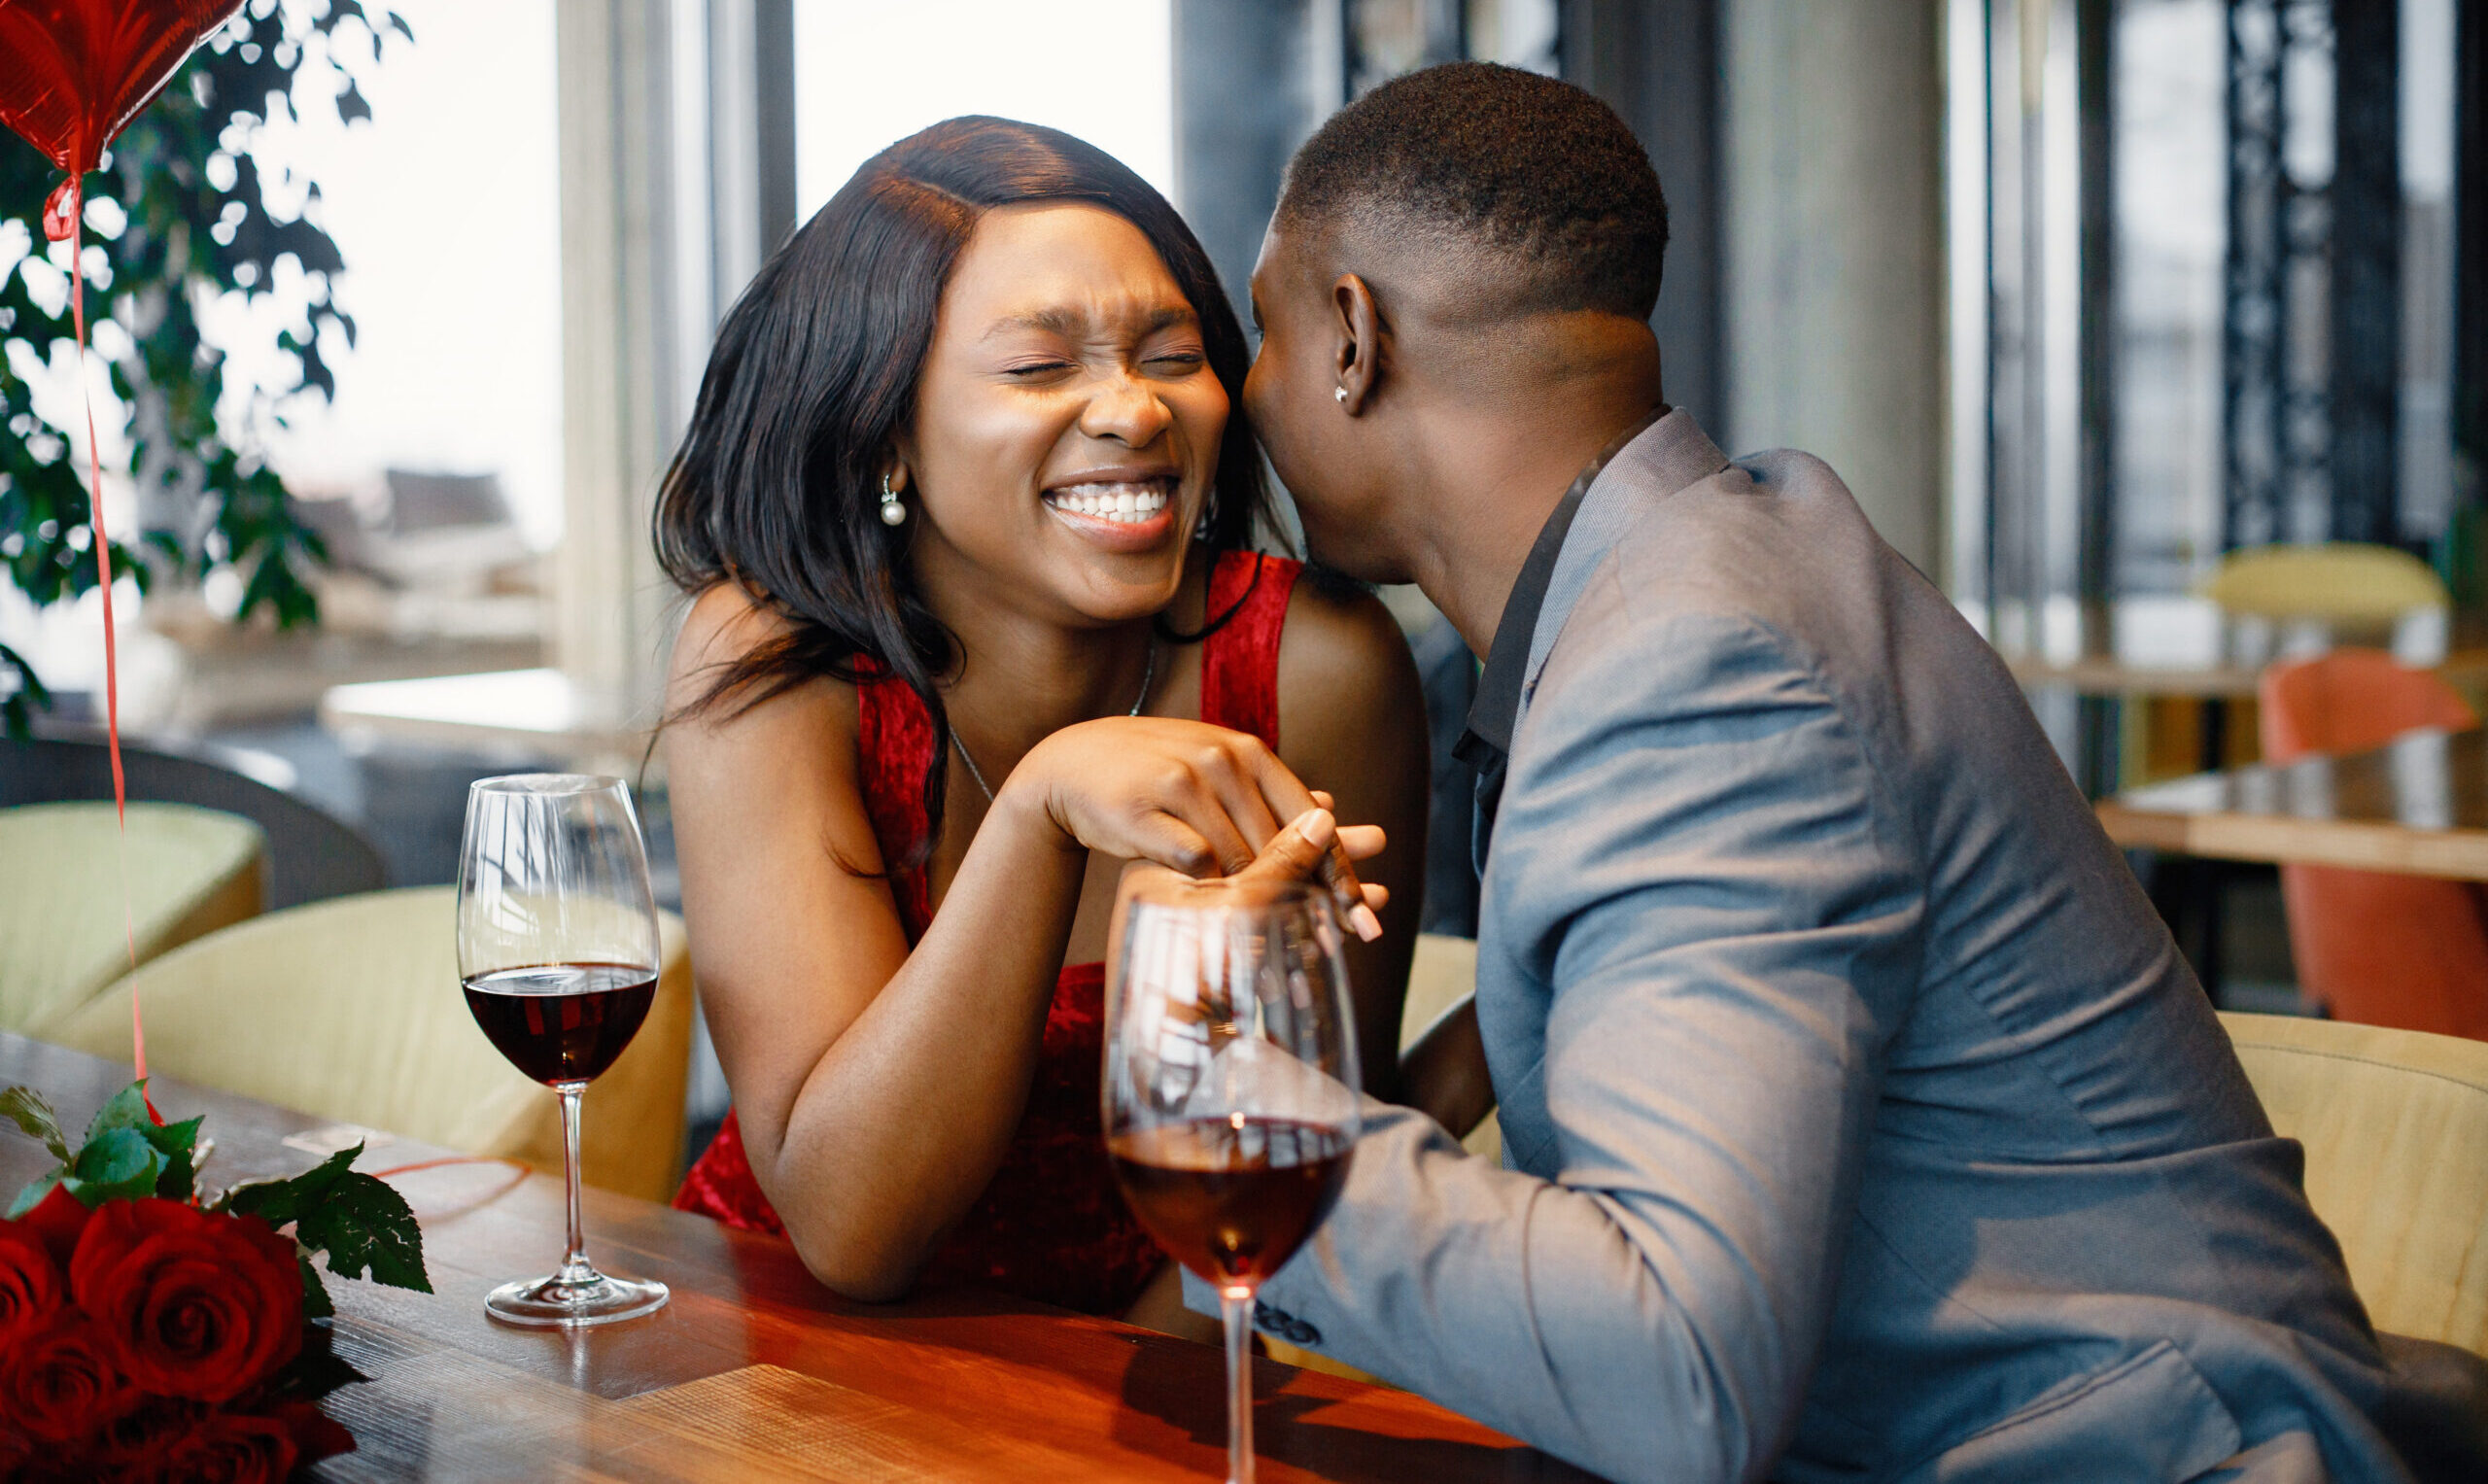 Couple enjoying day out at restaurant. Black man and woman talking and holding hands. Woman wearing red elegant dress and man blue costume.